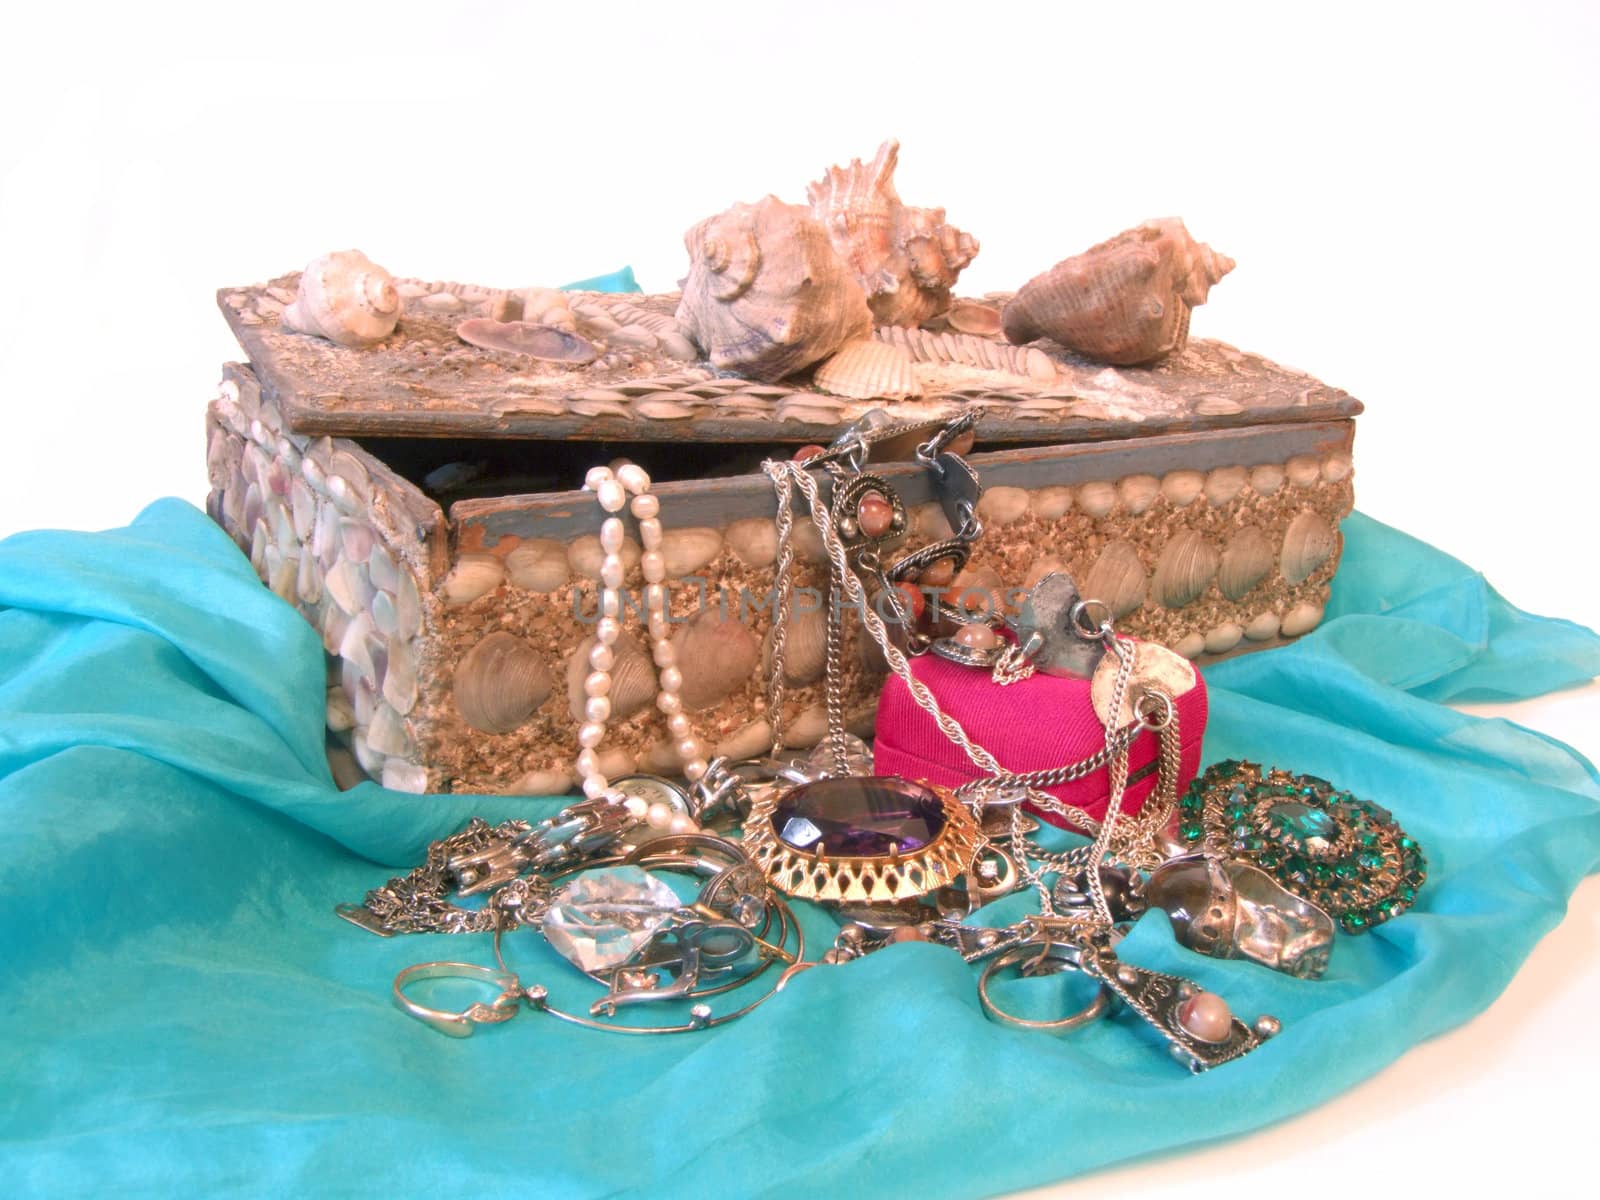 Small box with valuables and treasure 